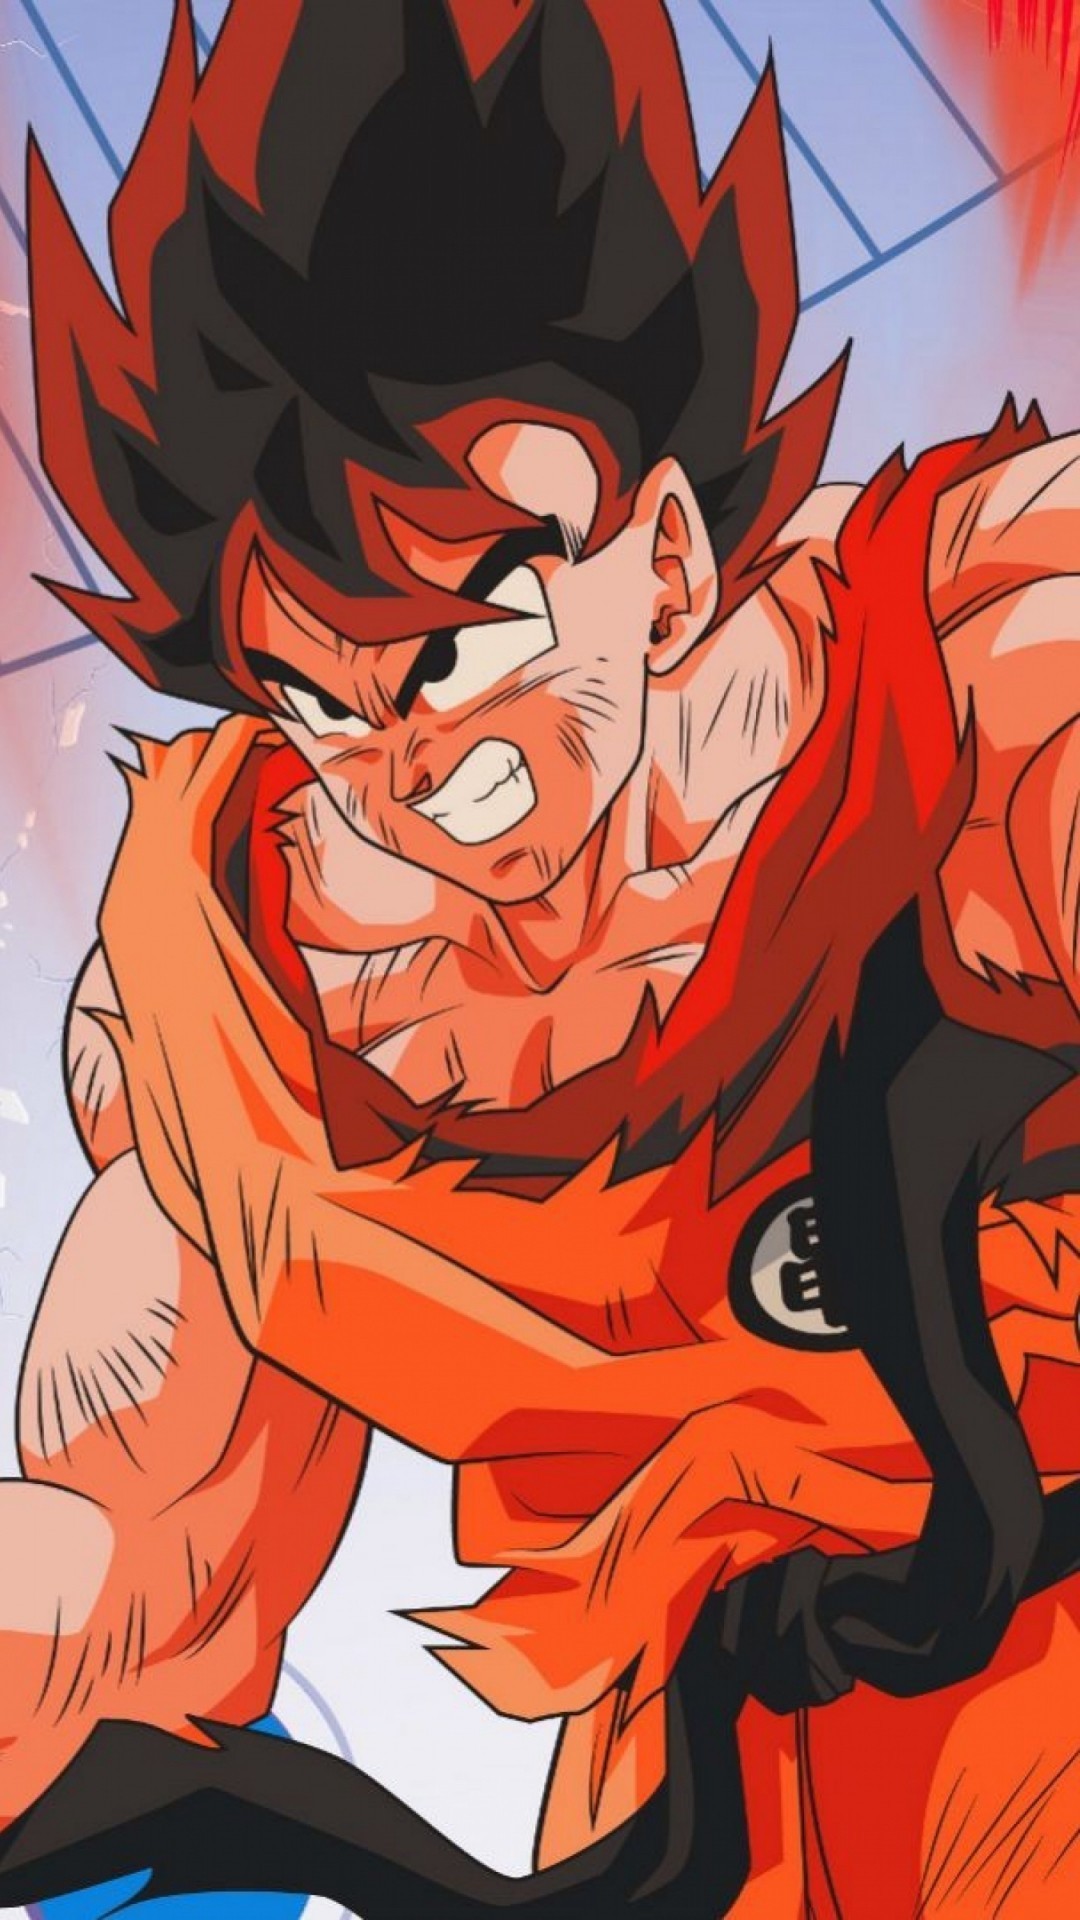 iPhone 8 Wallpaper Goku Super Saiyan God with image resolution 1080x1920 pixel. You can make this wallpaper for your iPhone 5, 6, 7, 8, X backgrounds, Mobile Screensaver, or iPad Lock Screen